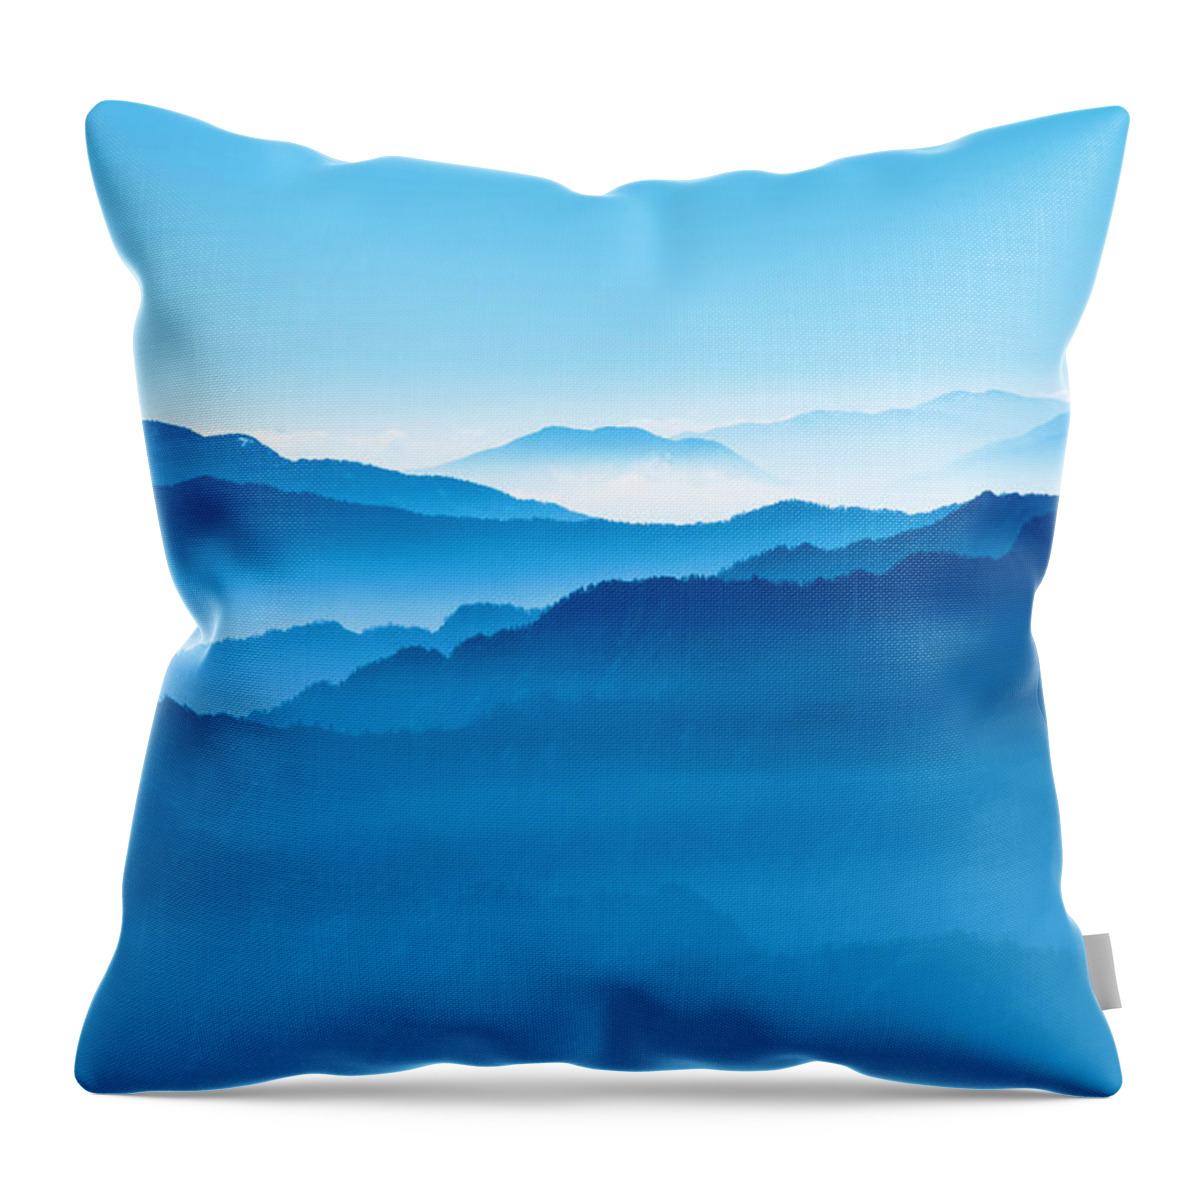 Chinese Culture Throw Pillow featuring the photograph Blue Scenics by 4x-image